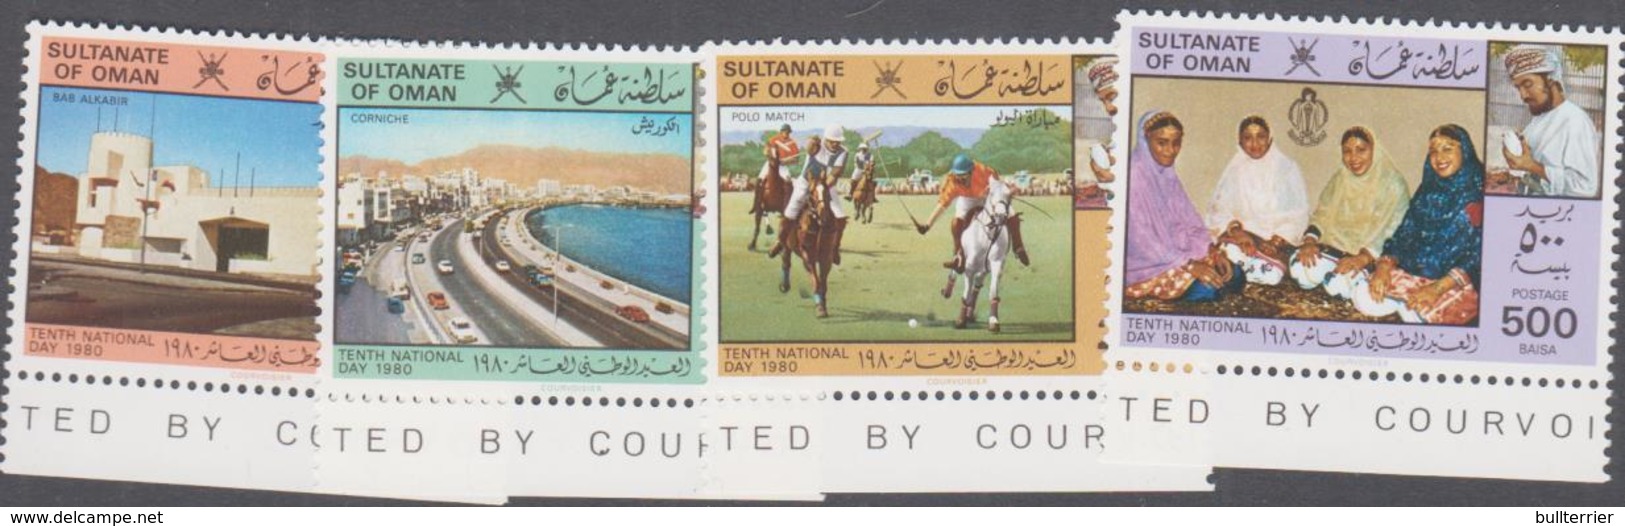 OMAN -  1980 - NATIONAL DAY SET OF 4 MINT NEVER HINGED , ,SG CAT £28 - Oman